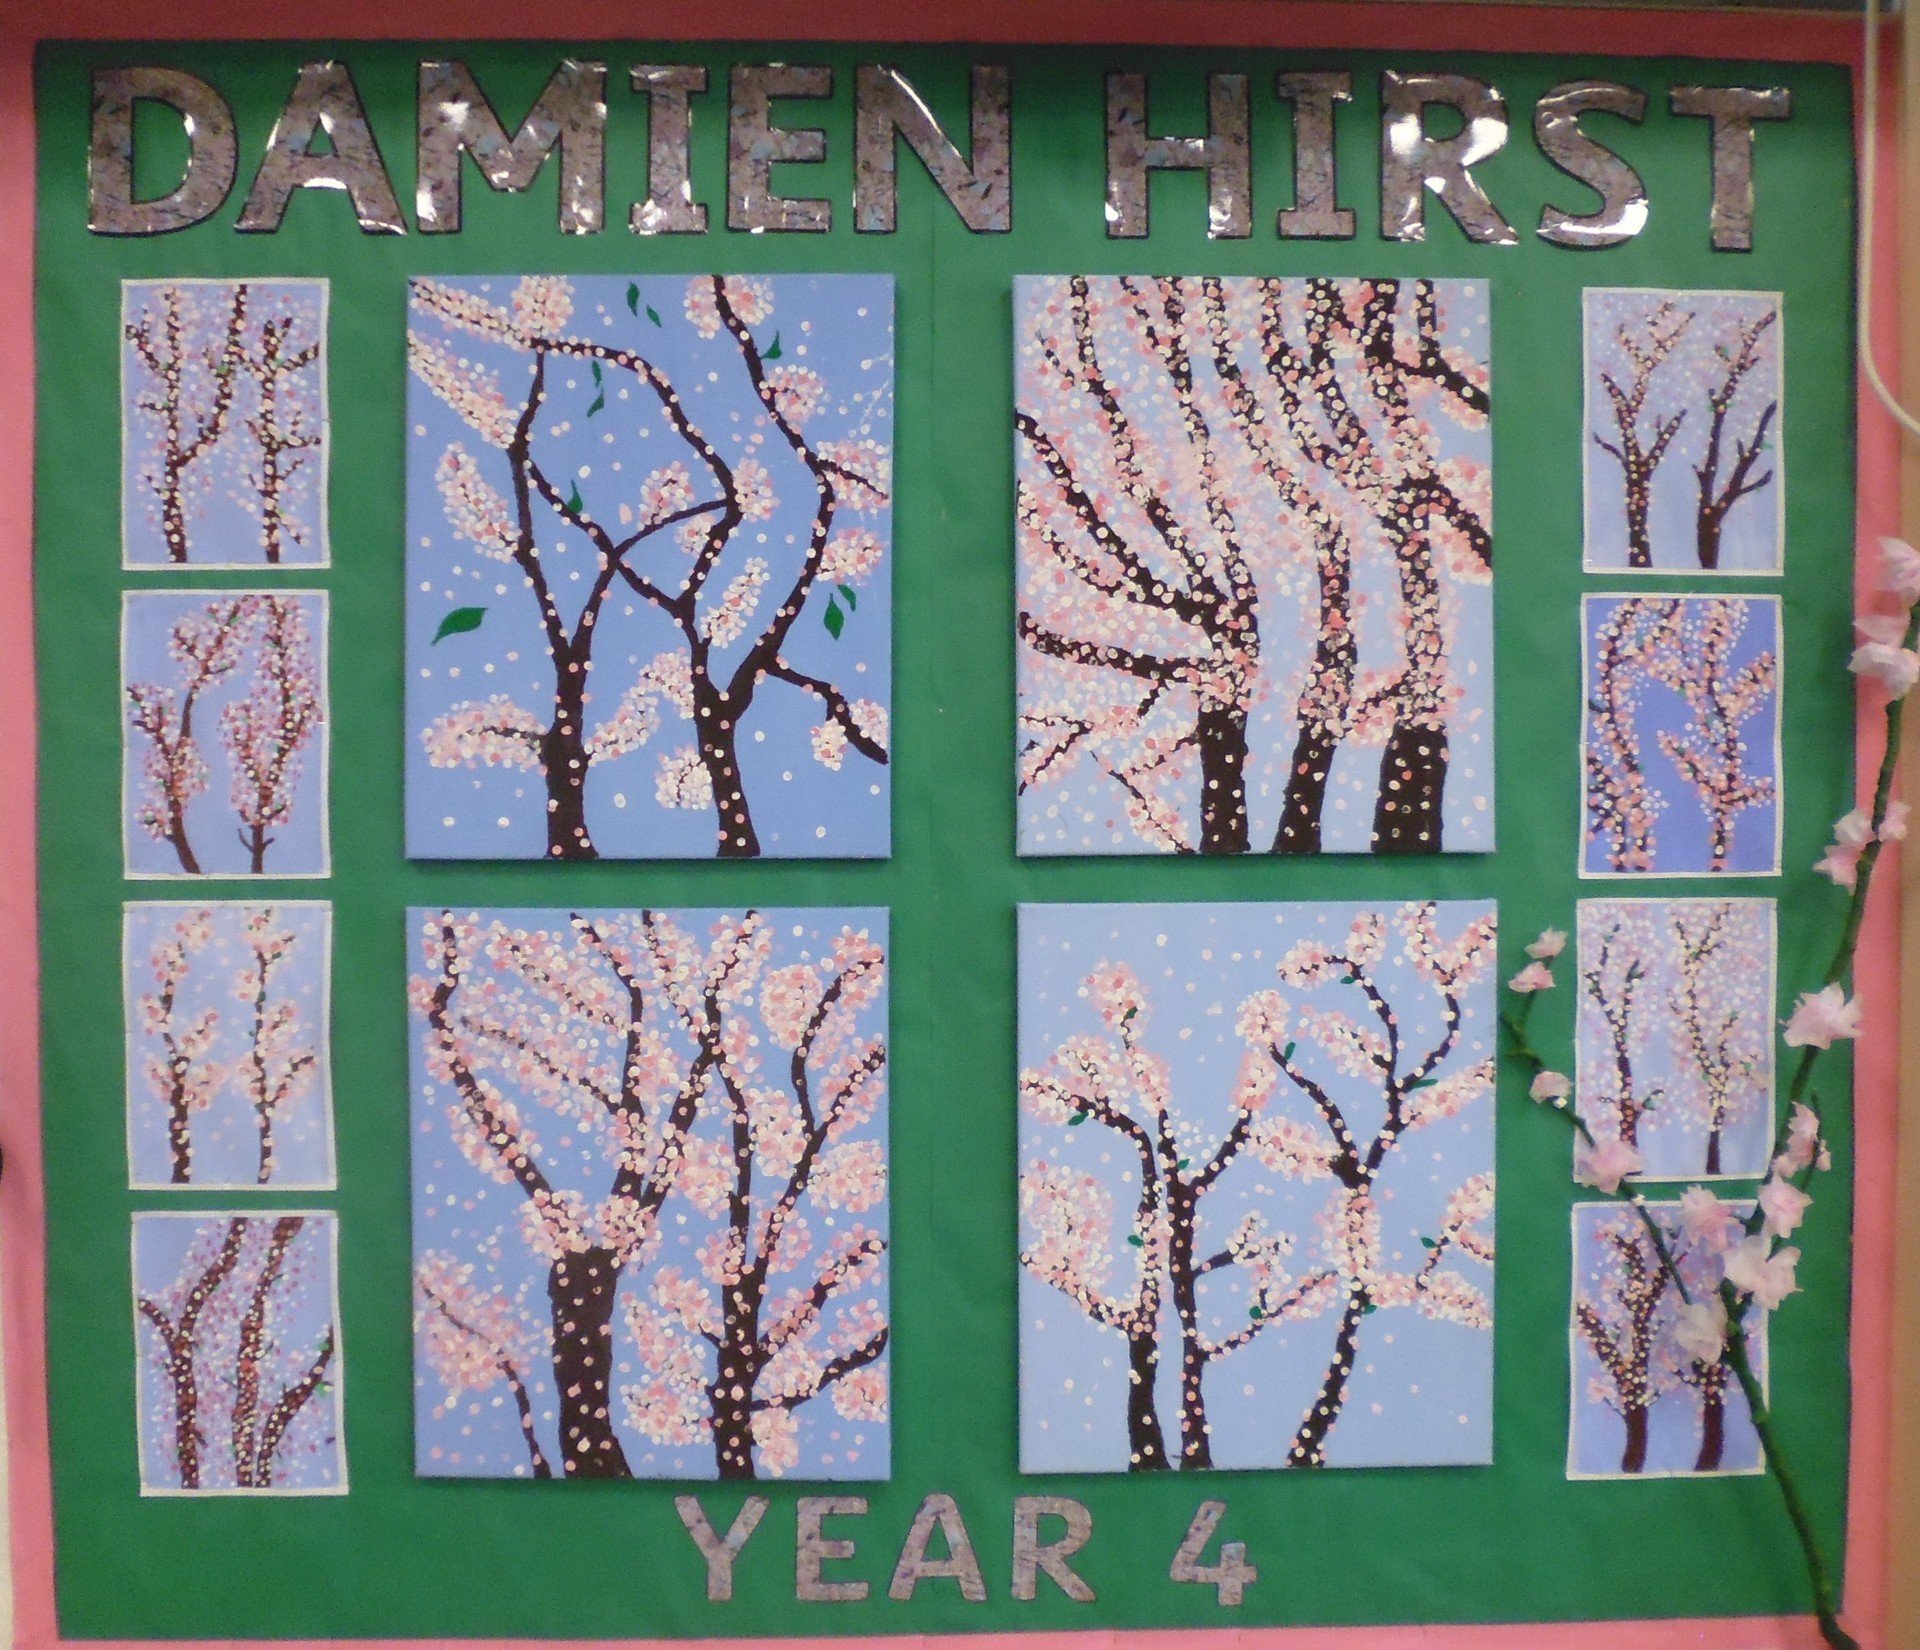 Damien HIrst by Year 4